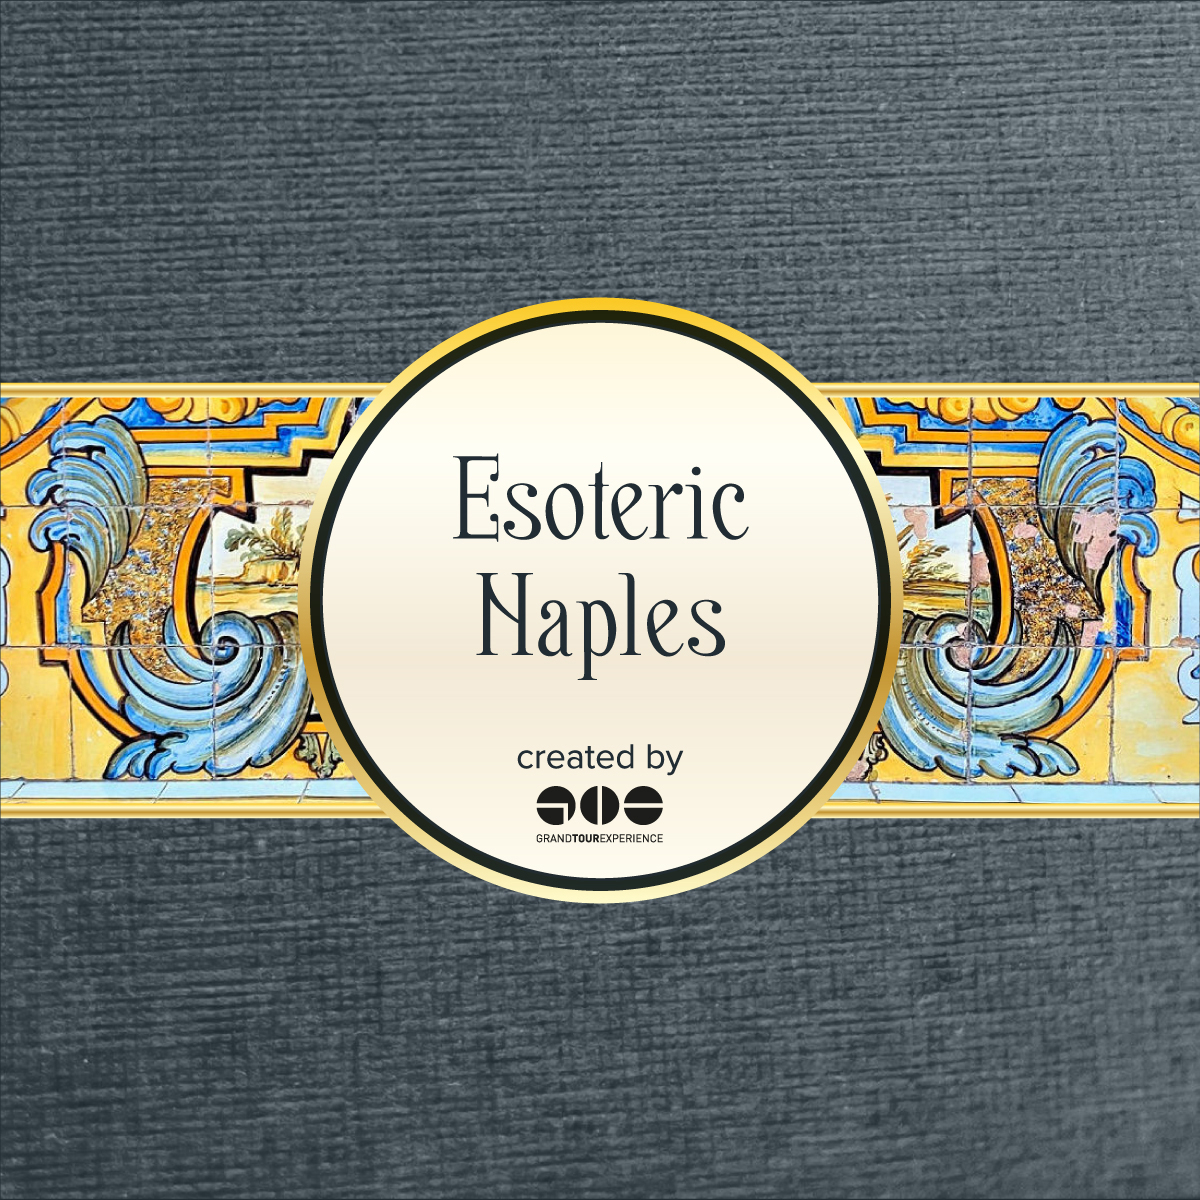 Esoteric Naples: a Trip inside Mystery and Magic